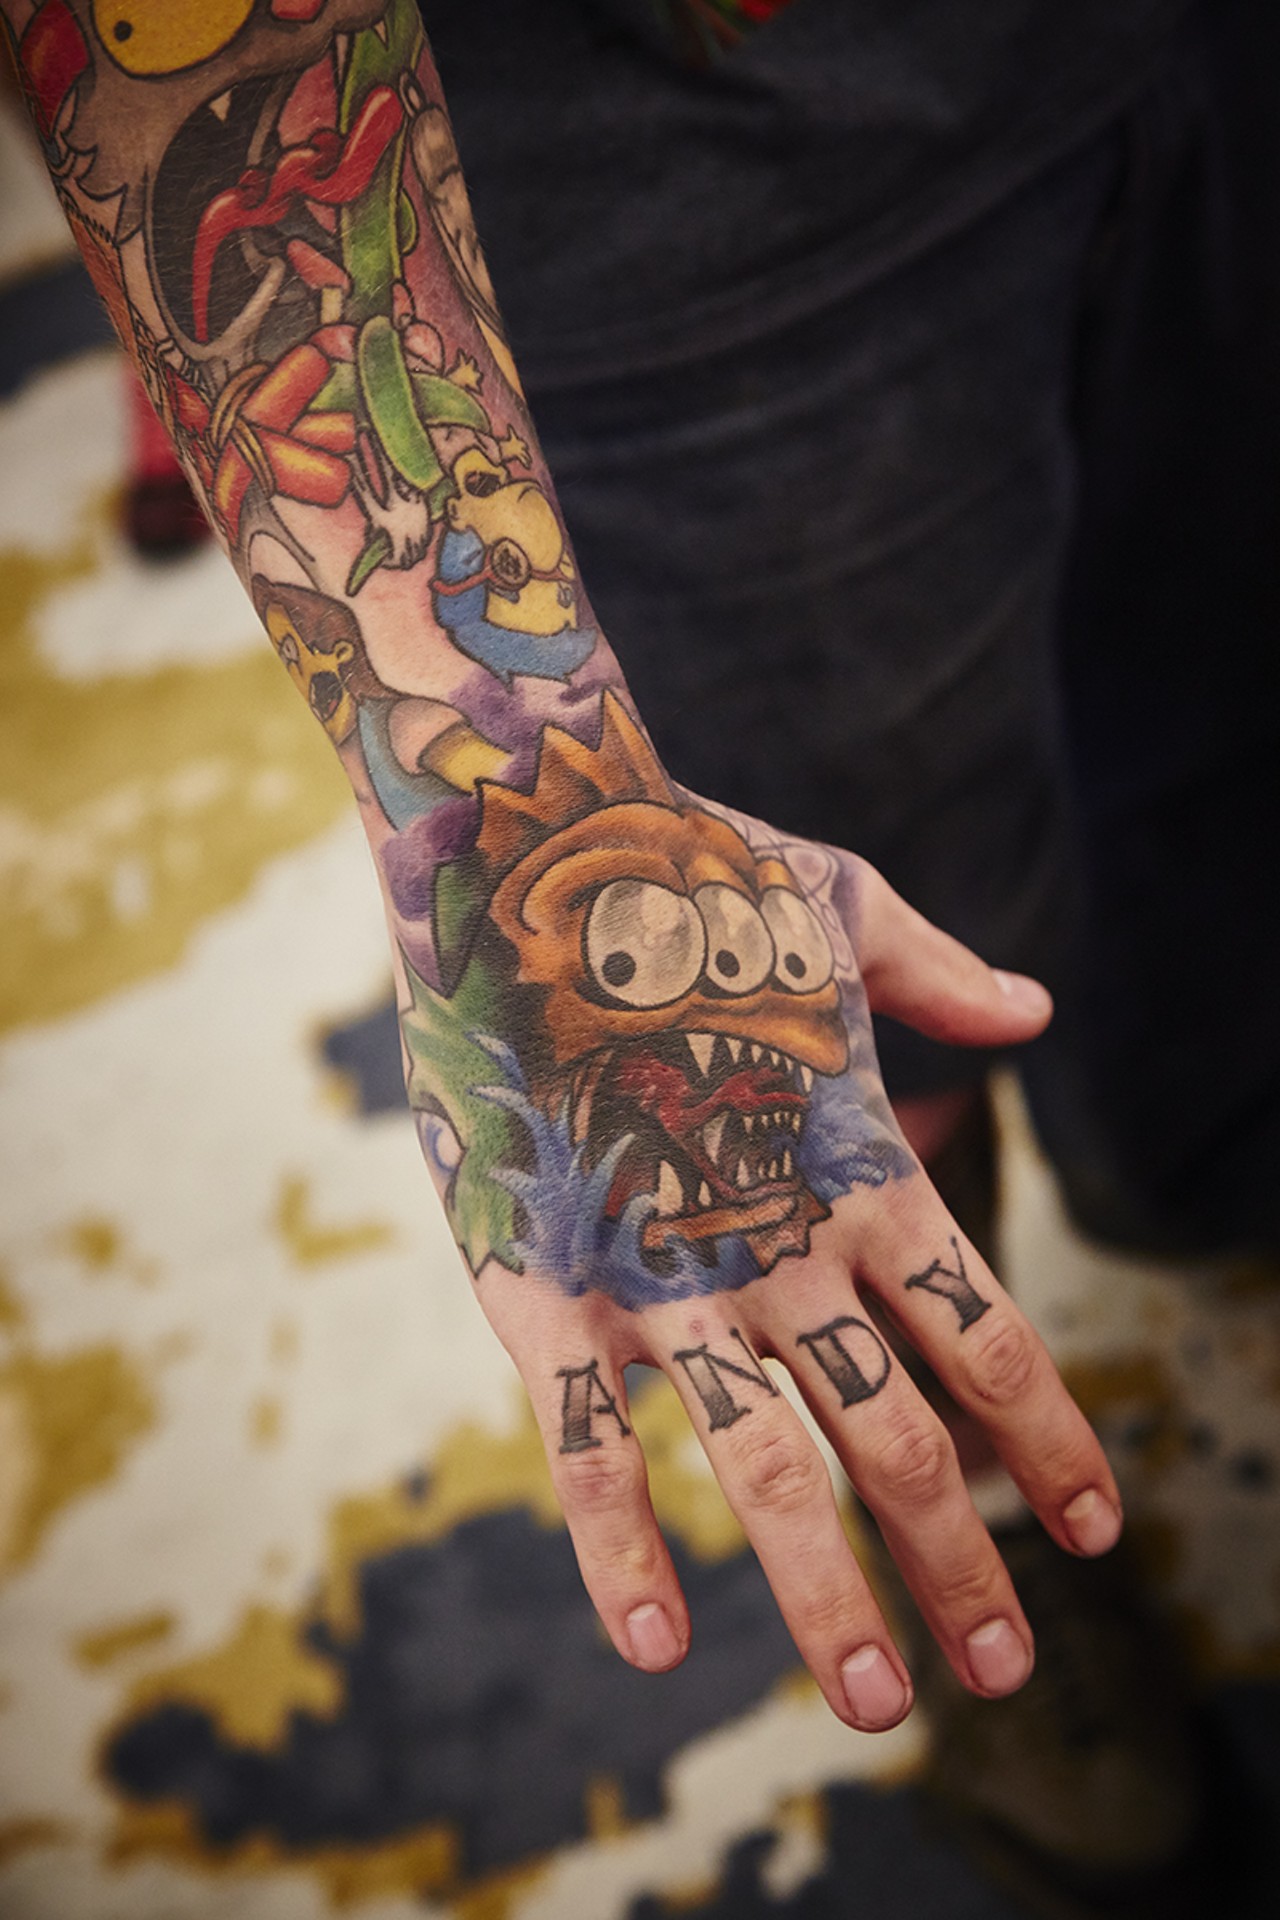 Andy and his cartoon ink forearm.